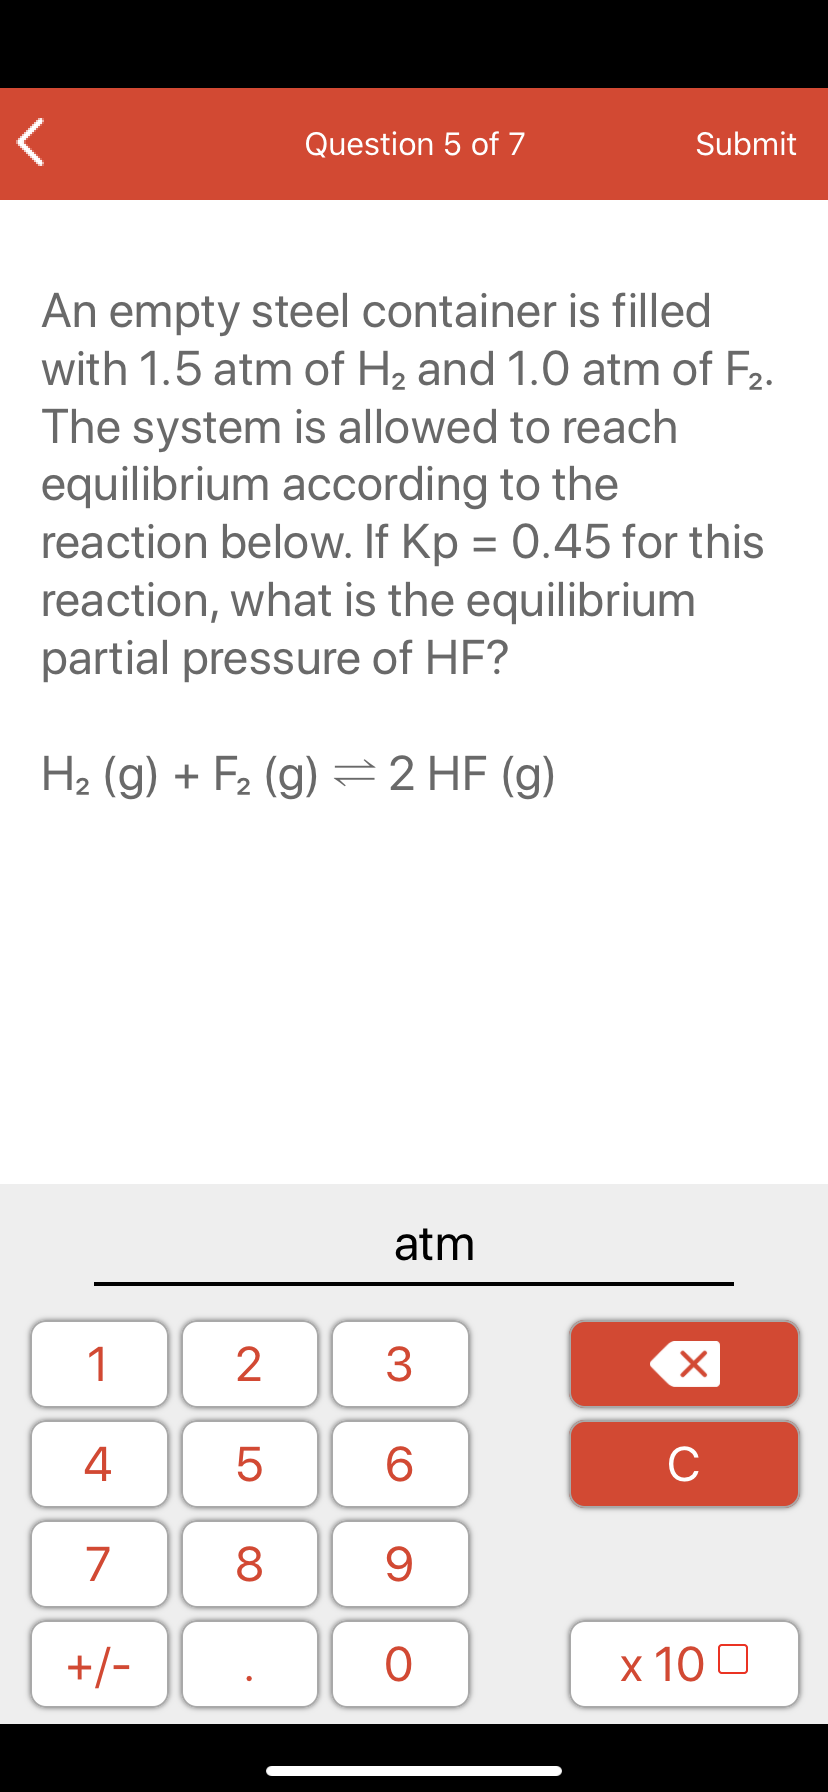 An empty steel container is filled
with 1.5 atm of H2 and 1.0 atm of F2.
The system is allowed to reach
equilibrium according to the
reaction below. If Kp = 0.45 for this
reaction, what is the equilibrium
partial pressure of HF?
H2 (g) + F2 (g) =2 HF (g)
